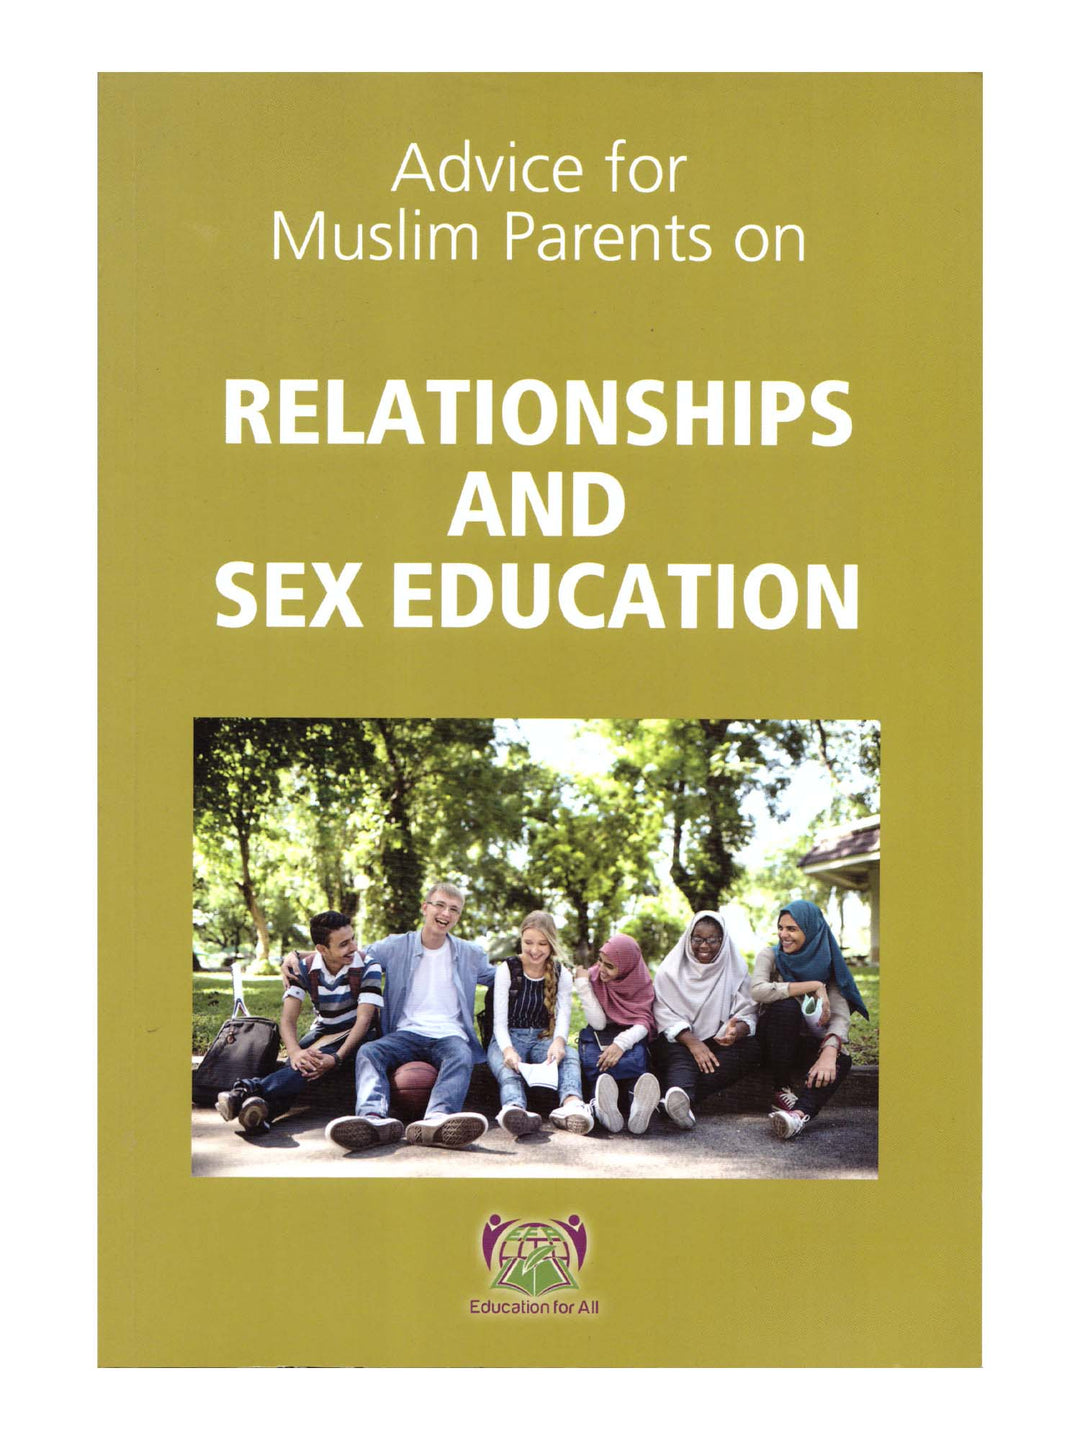 Advice for Muslim Parents on Relationships